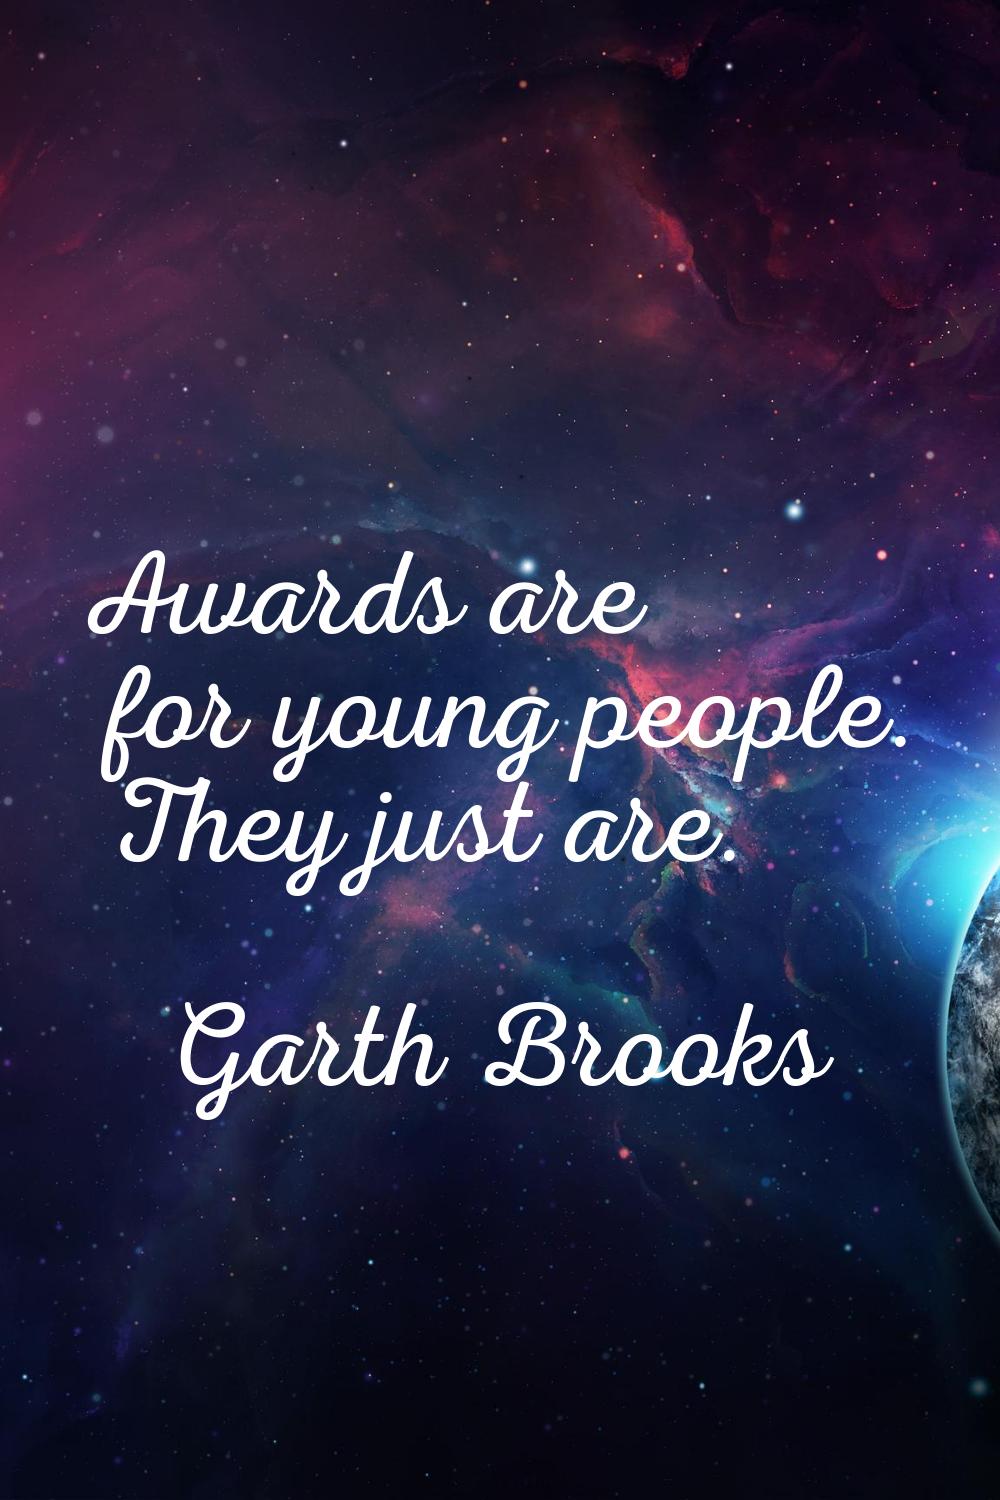 Awards are for young people. They just are.